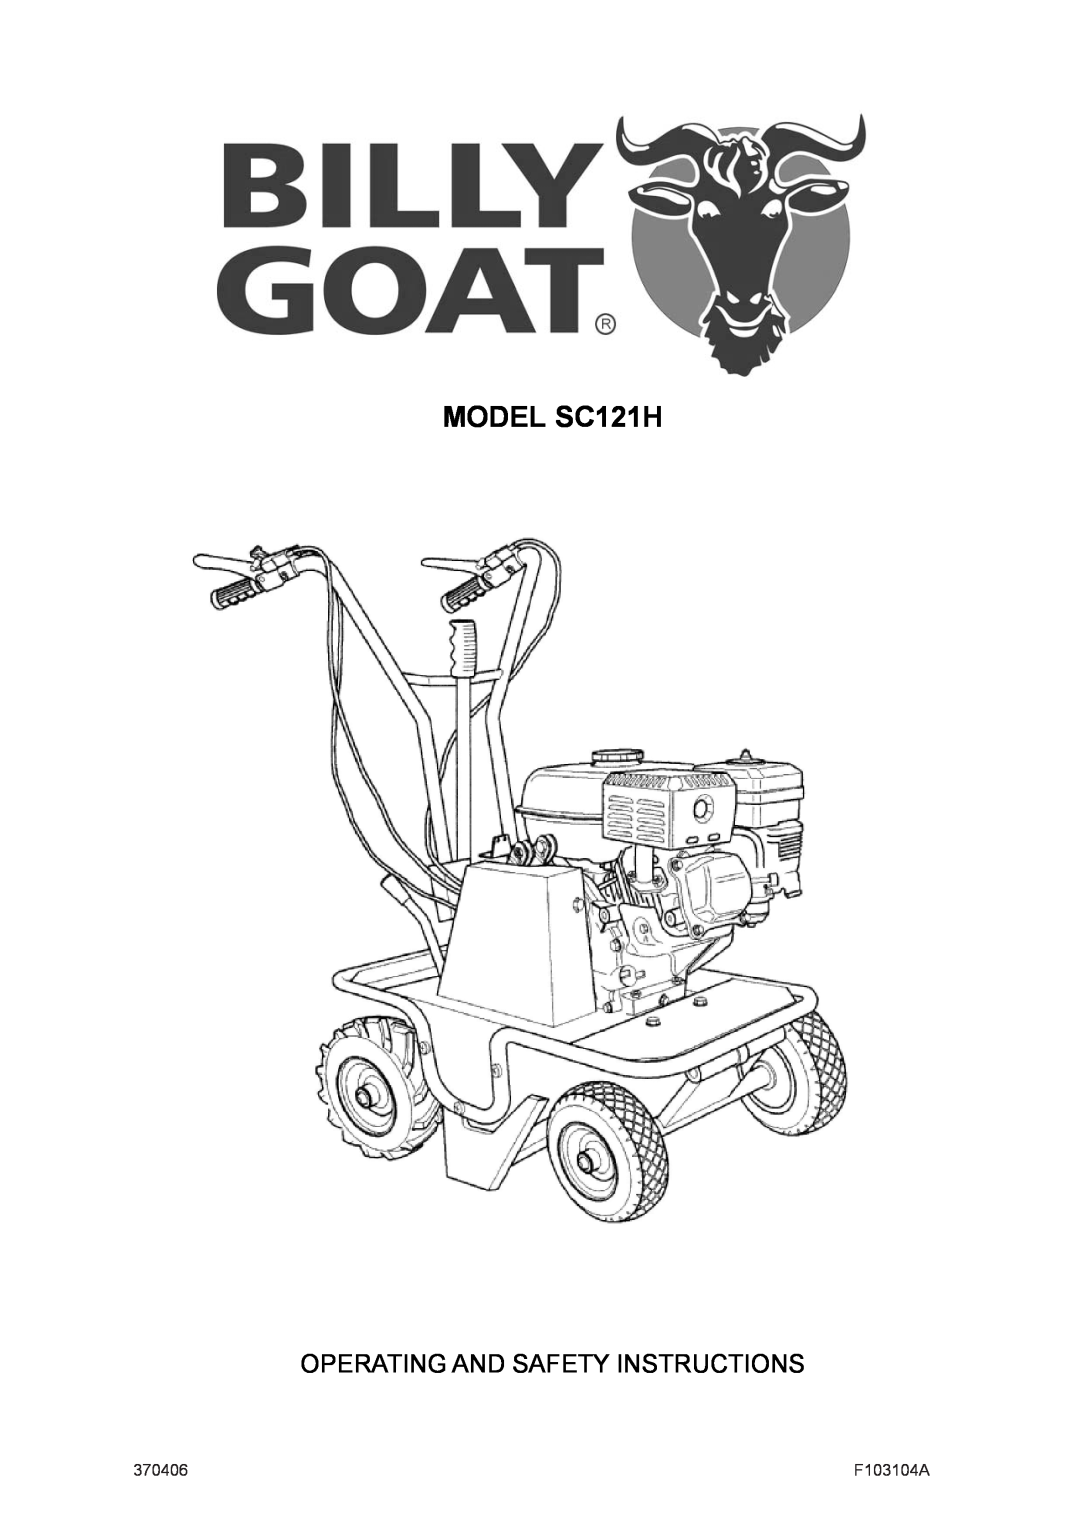 Billy Goat manual MODEL SC121H, Operating And Safety Instructions, F103104A, 370406 